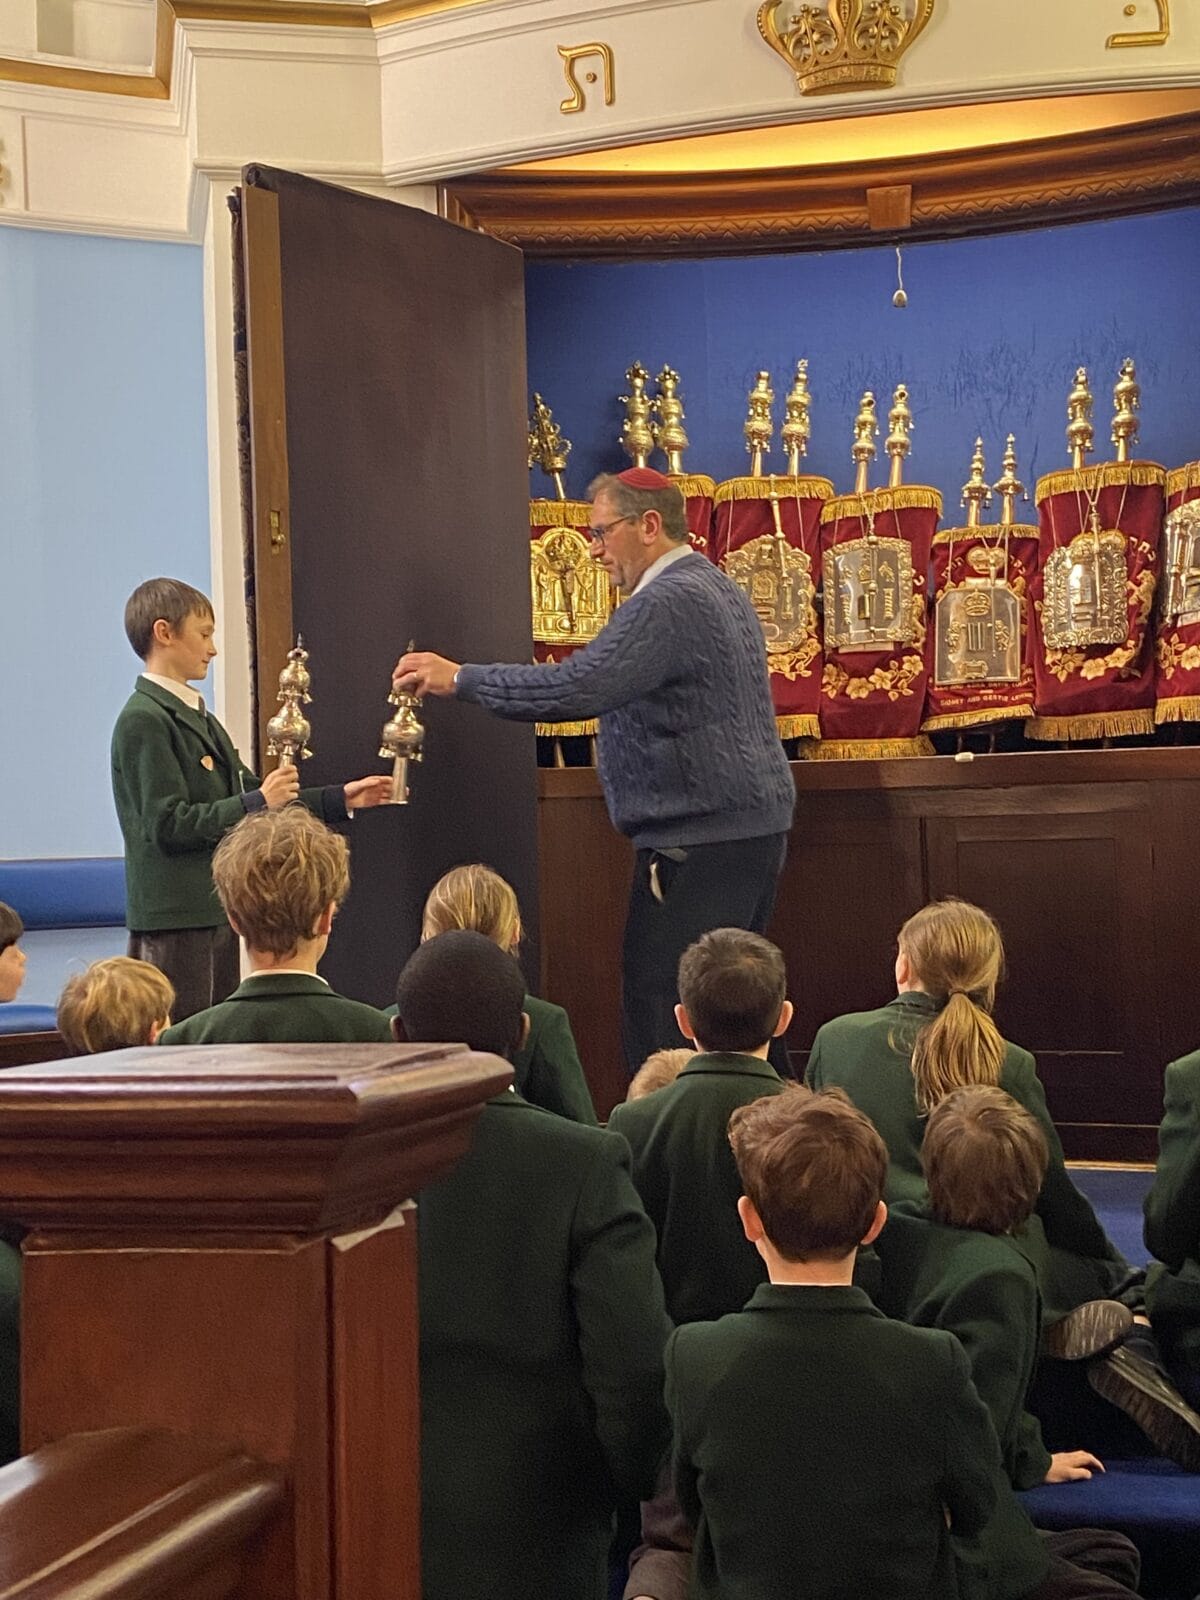 Pupils visiting a synagogue as part of their TPR learning